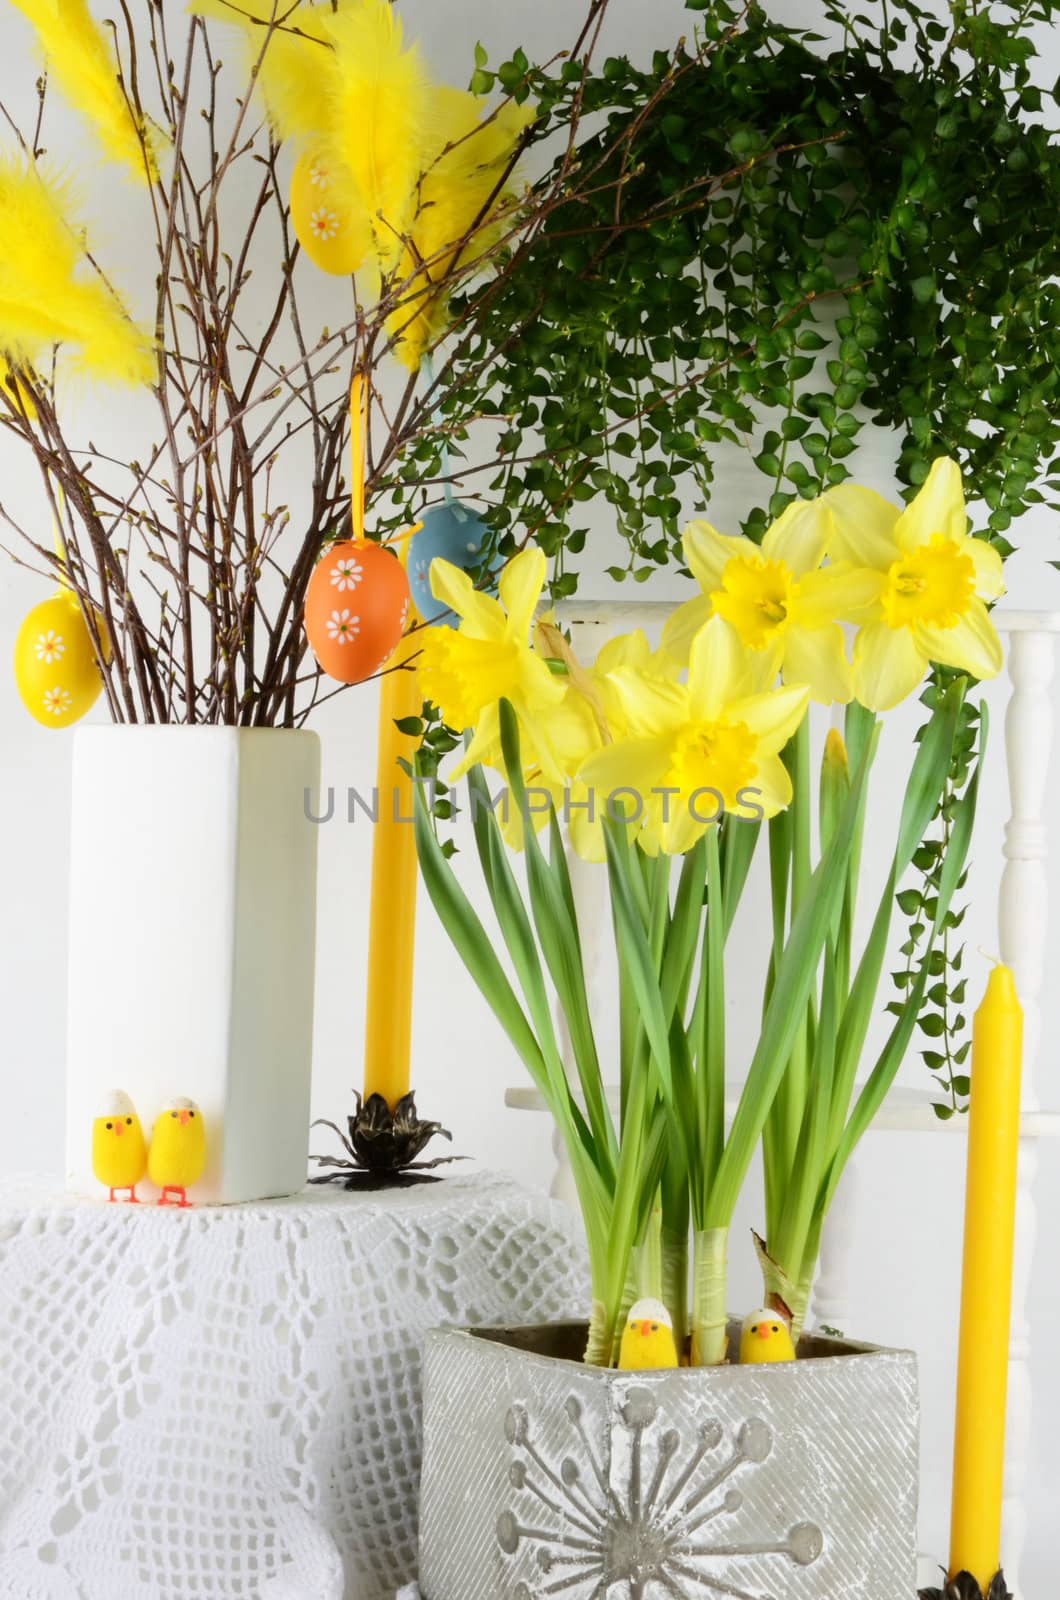 Easter lilies, Easter eggs, feathers and other decorations for Easter